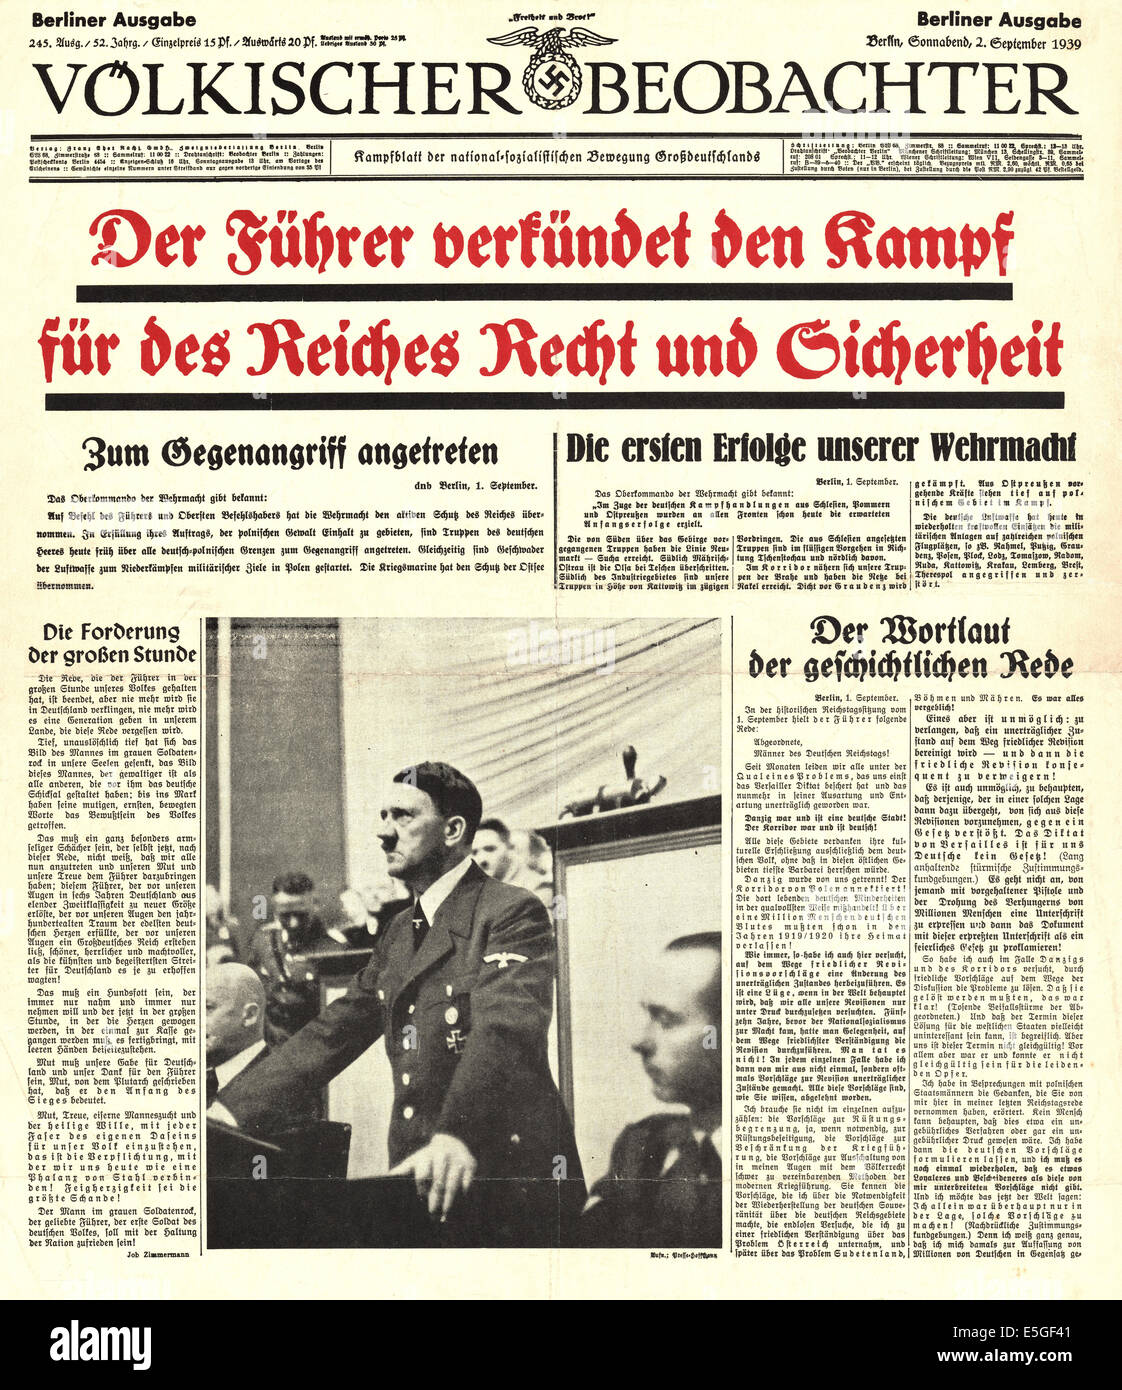 1939 Volkischer Beobachter (Germany) front page reporting Hitler's Reichstag speech for the Reich's law and security Stock Photo